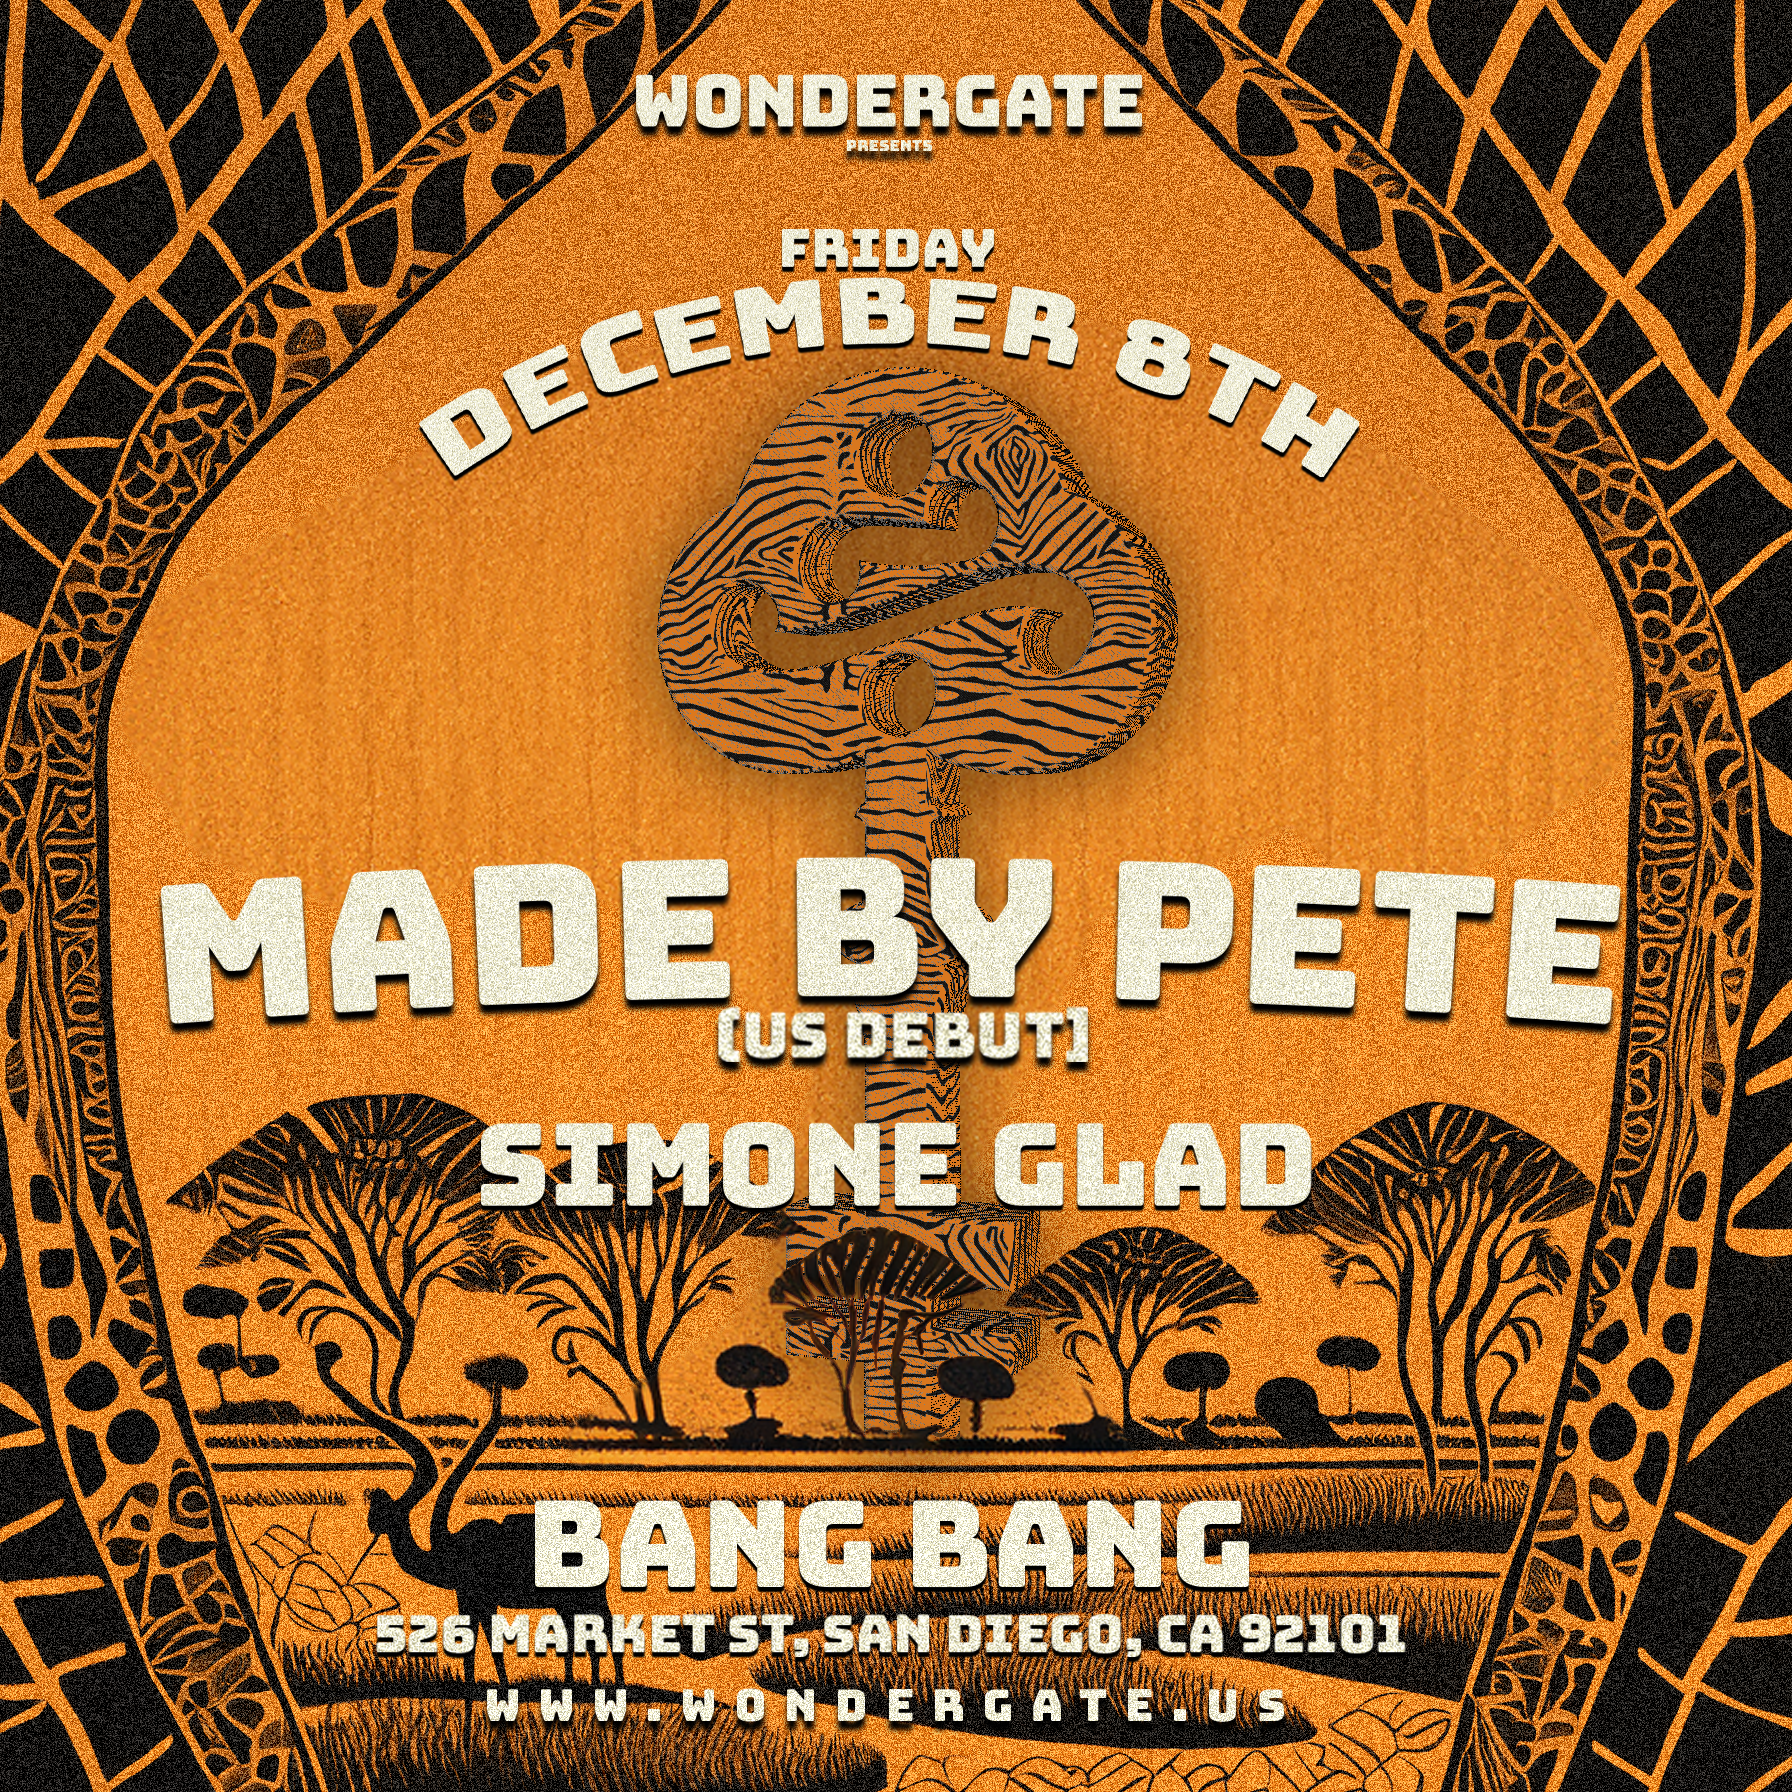 Wonder Gate presents: Made By Pete [US DEBUT] - フライヤー表